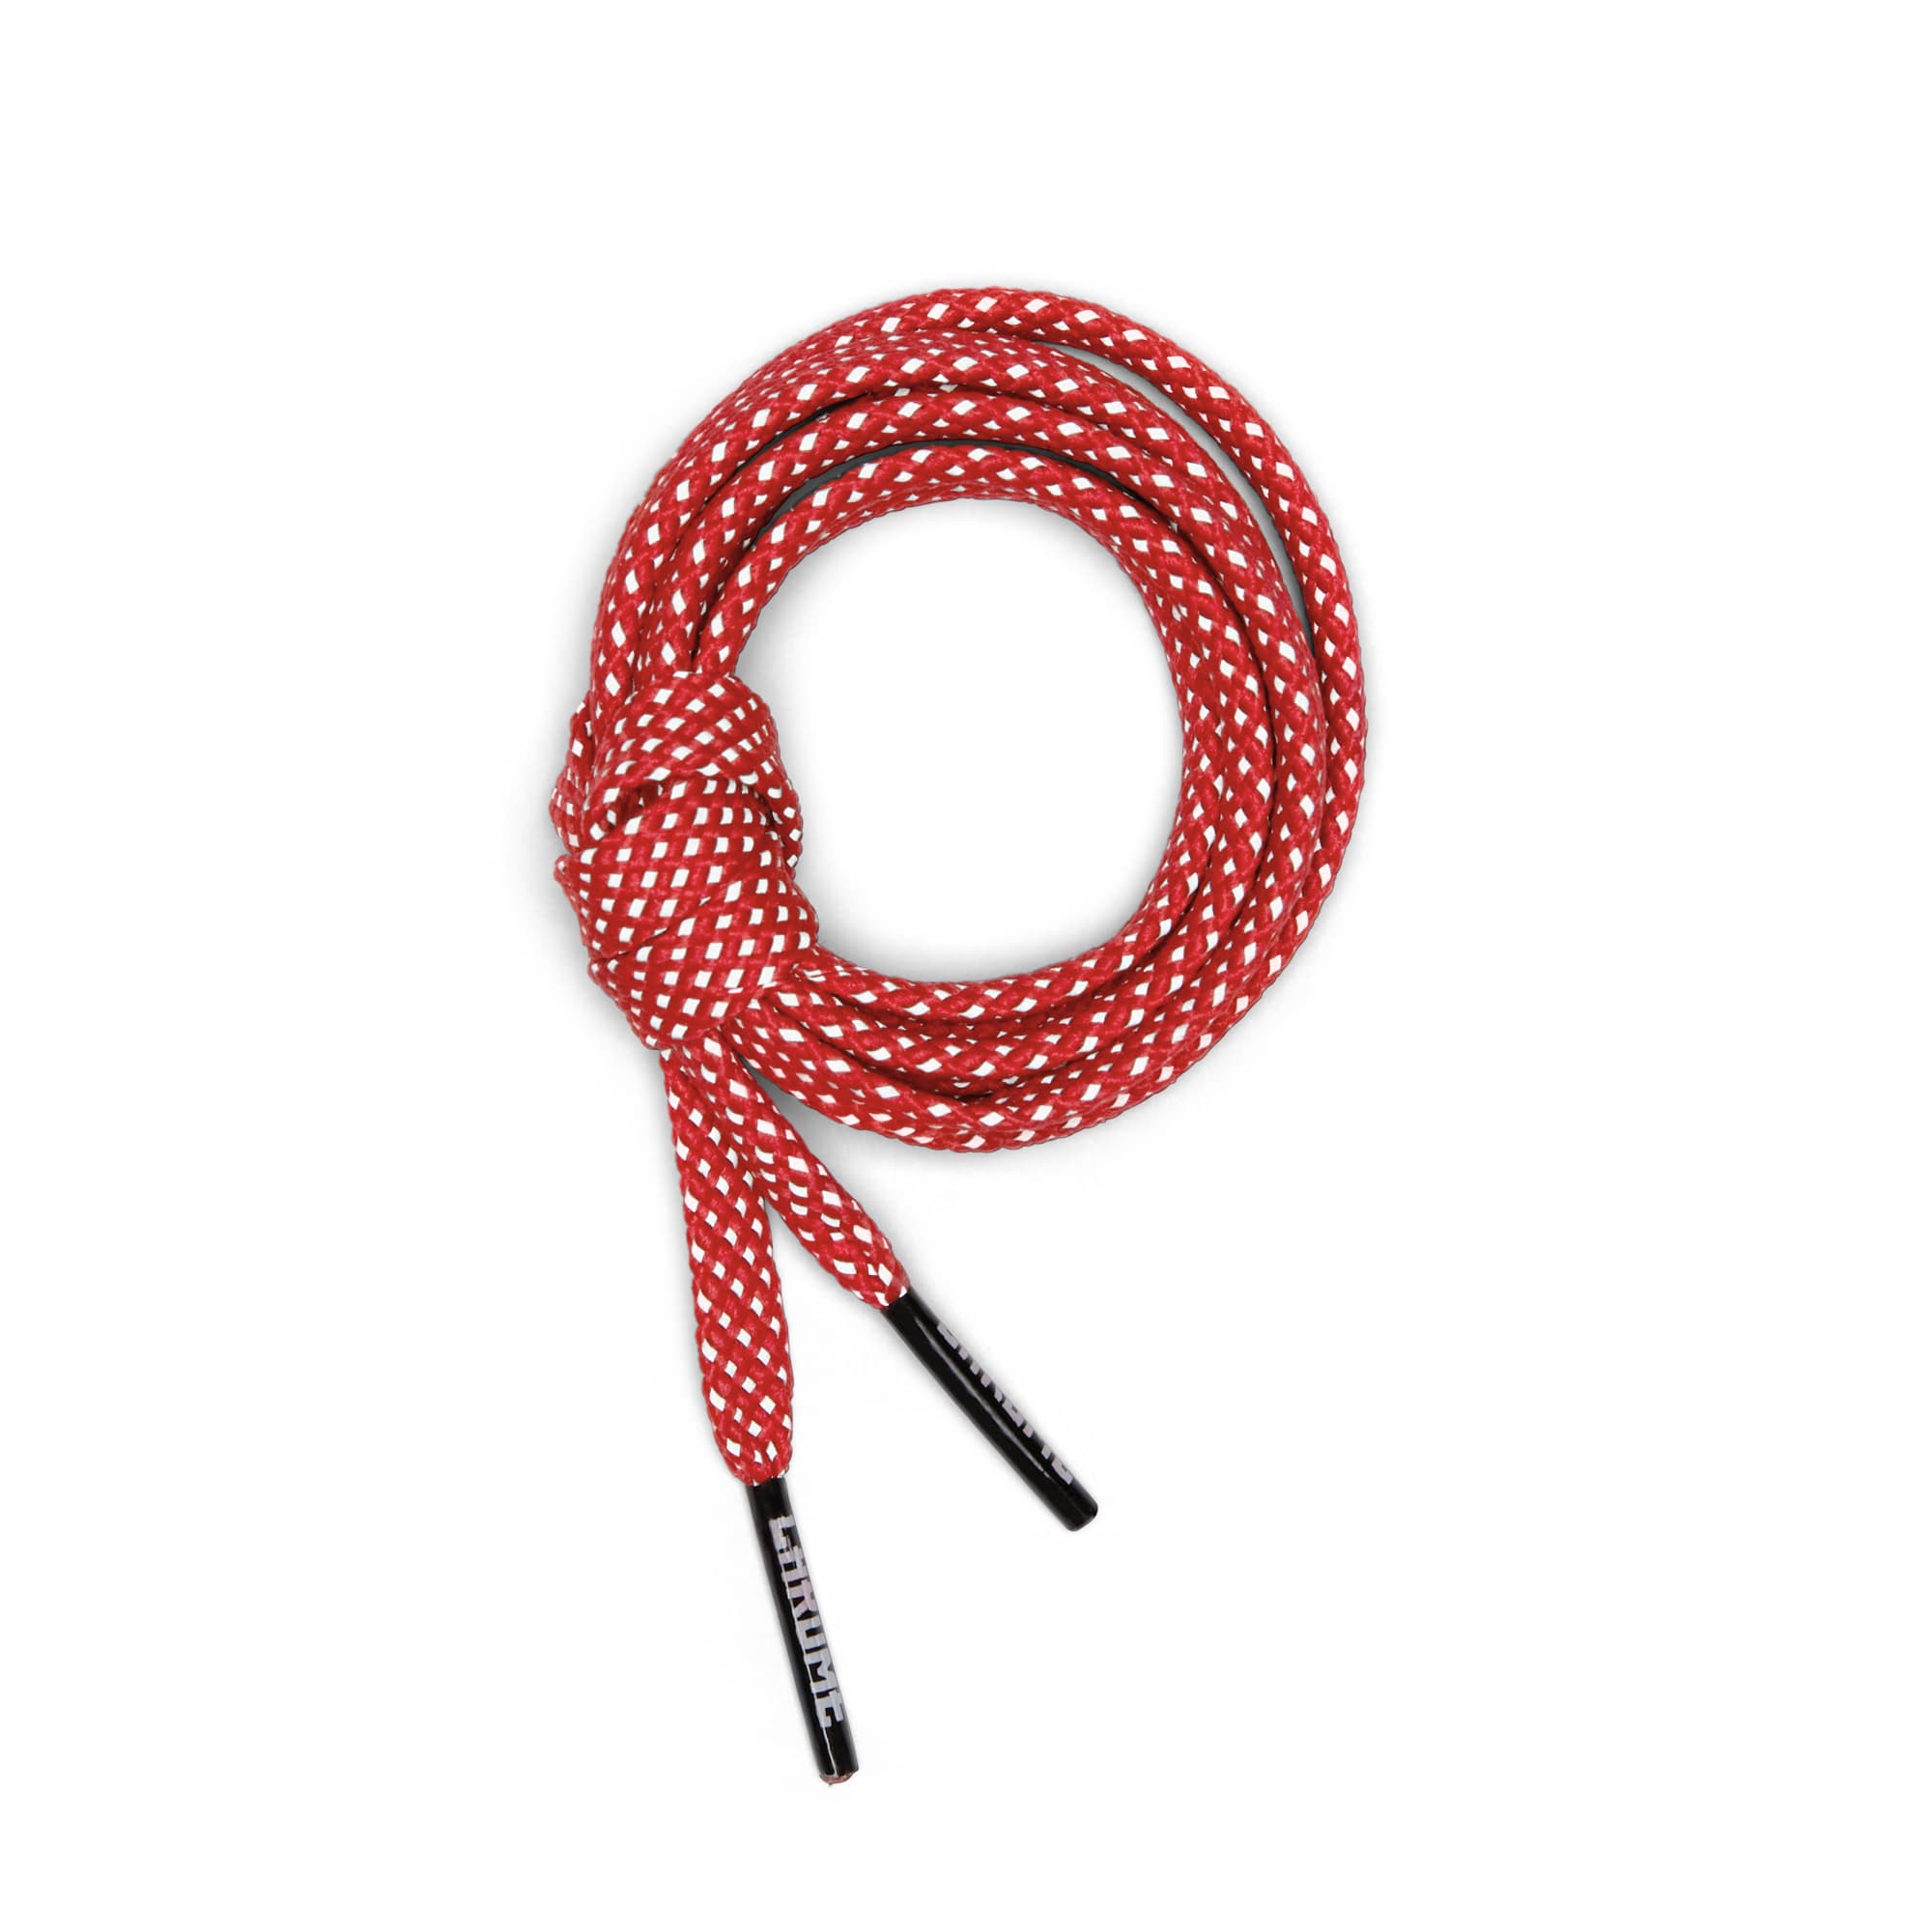 Reflective Flat Shoe Laces in red rolled with reflectivity showing #color_red reflective